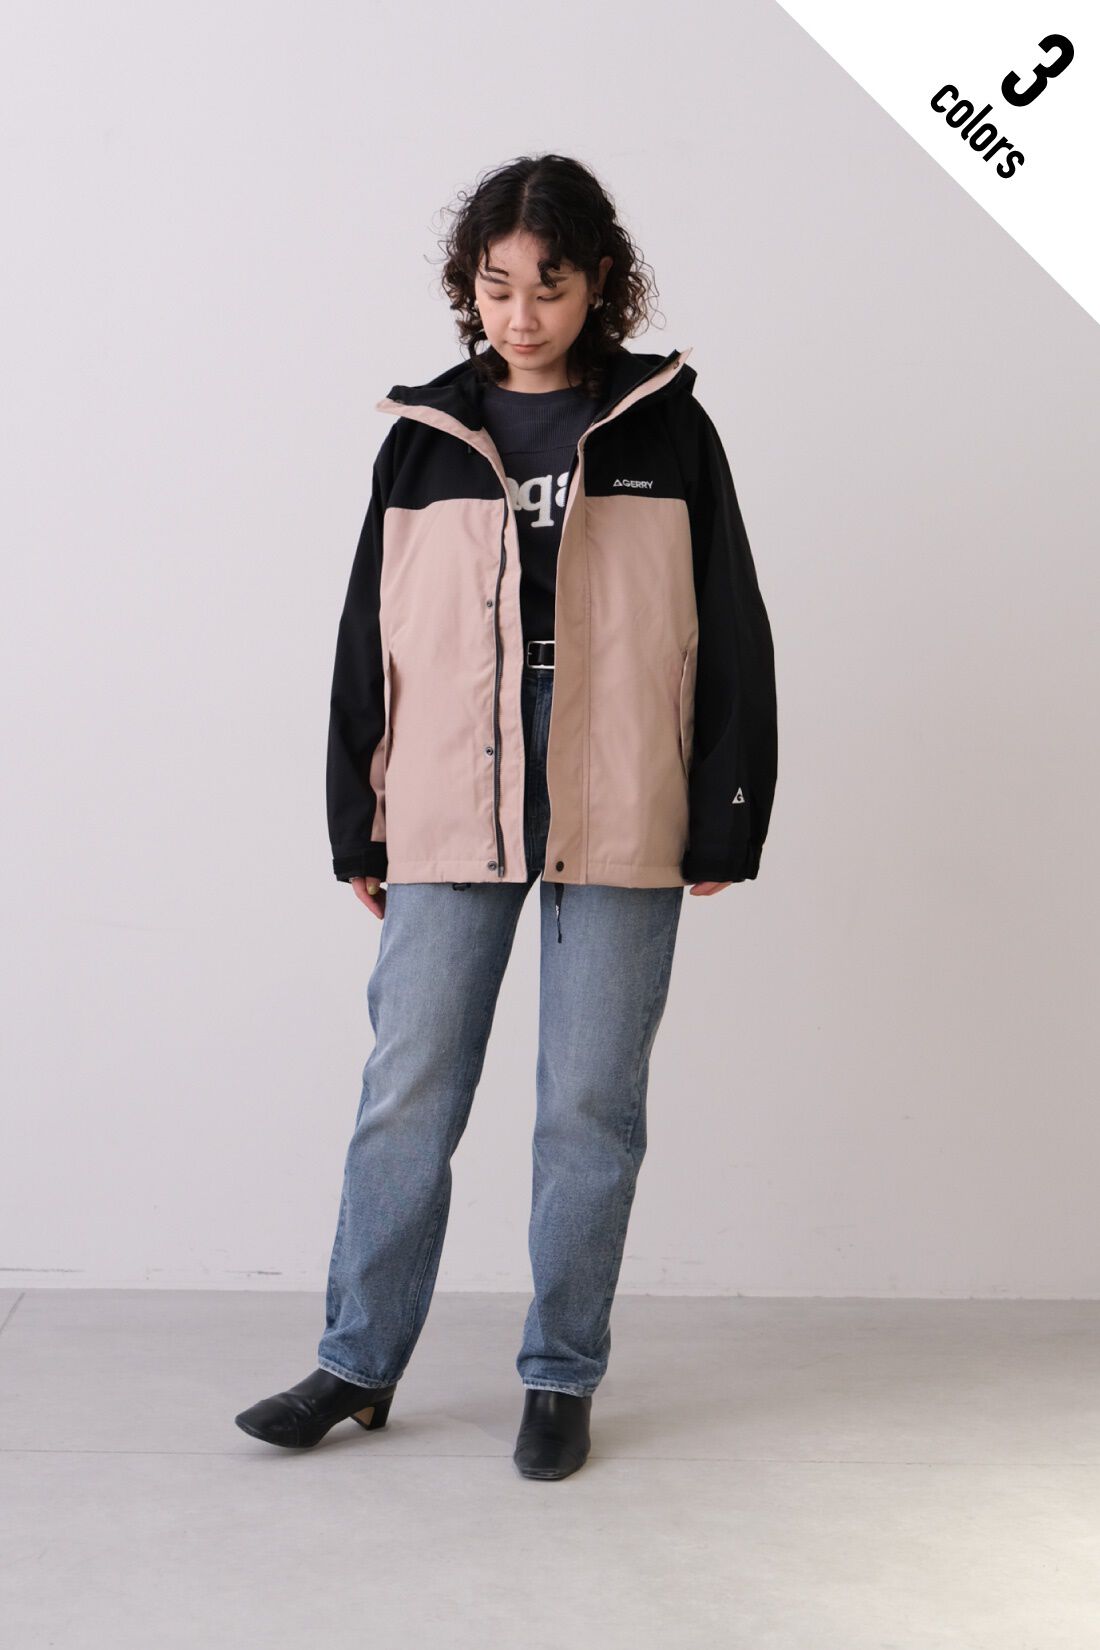 Real Stock|MEDE19F 〈SELECT〉　【GERRY】 4-WAY SHORT MOUNTAIN JACKET|2 beige モデル身長:157cm